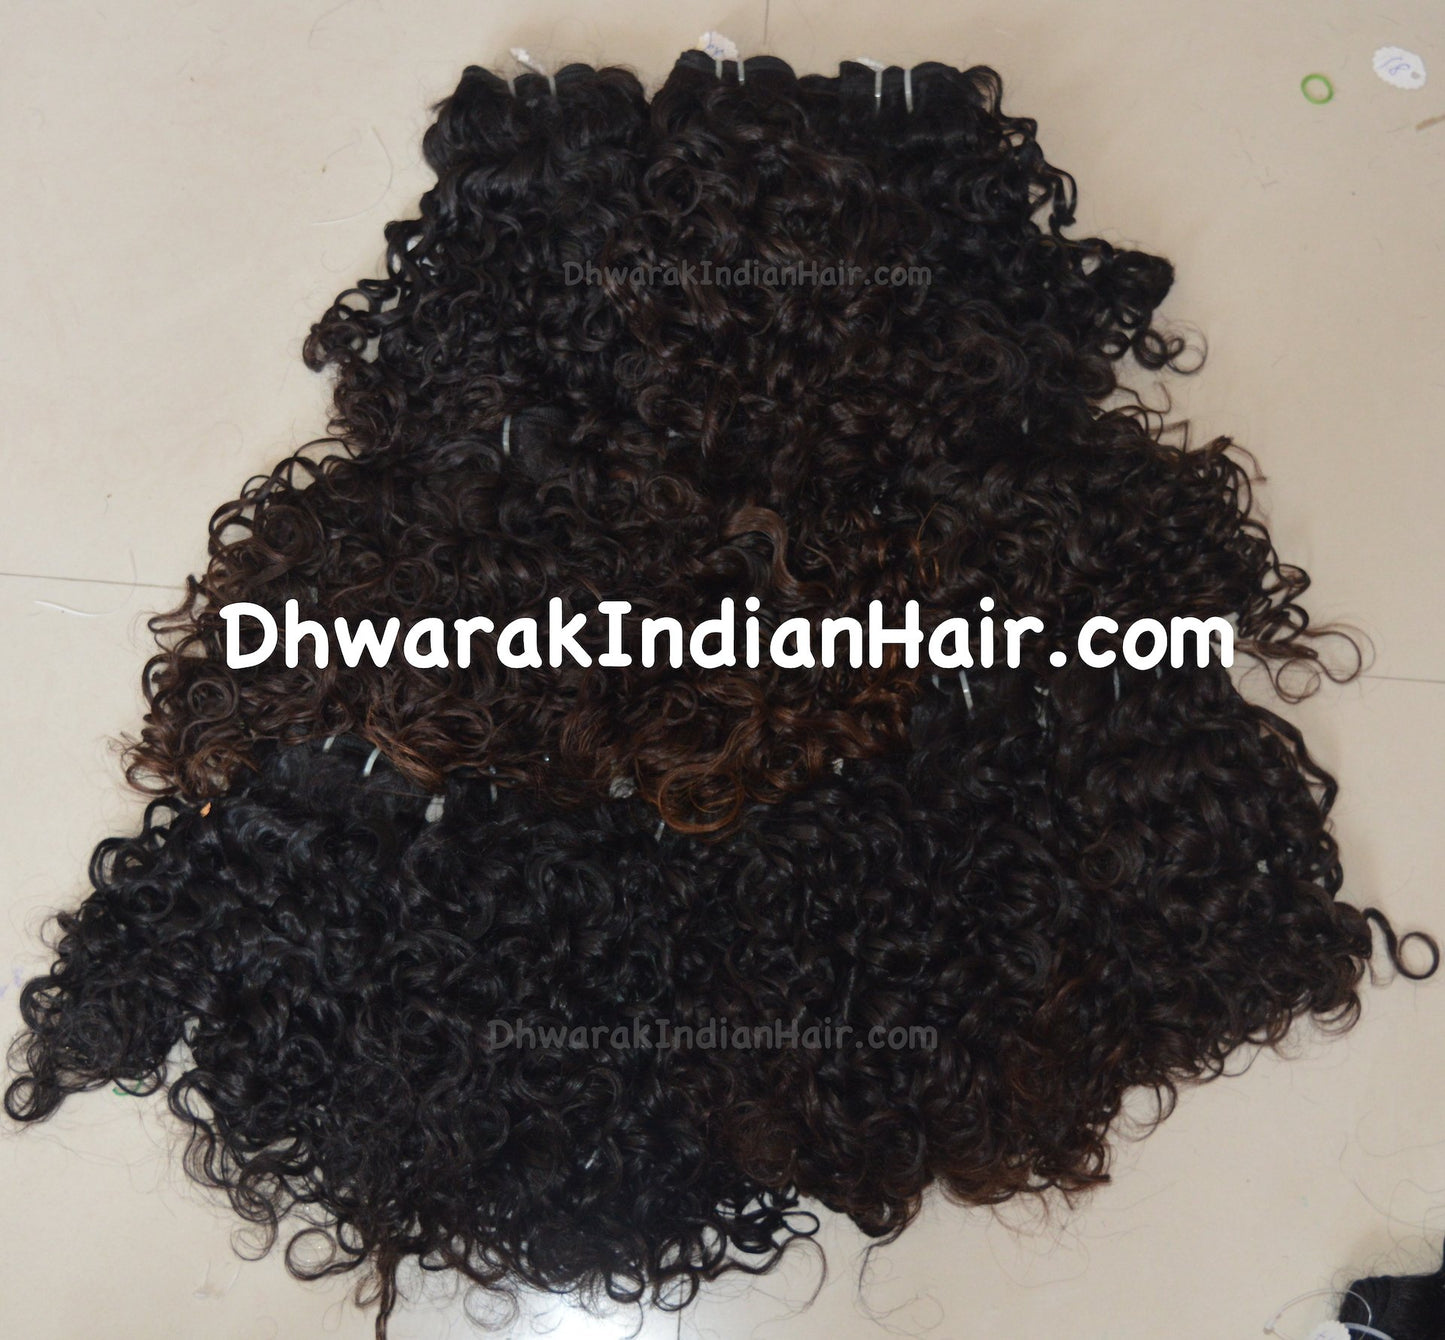 Wholesale Indian Hair Supplier and Distribution in United States 